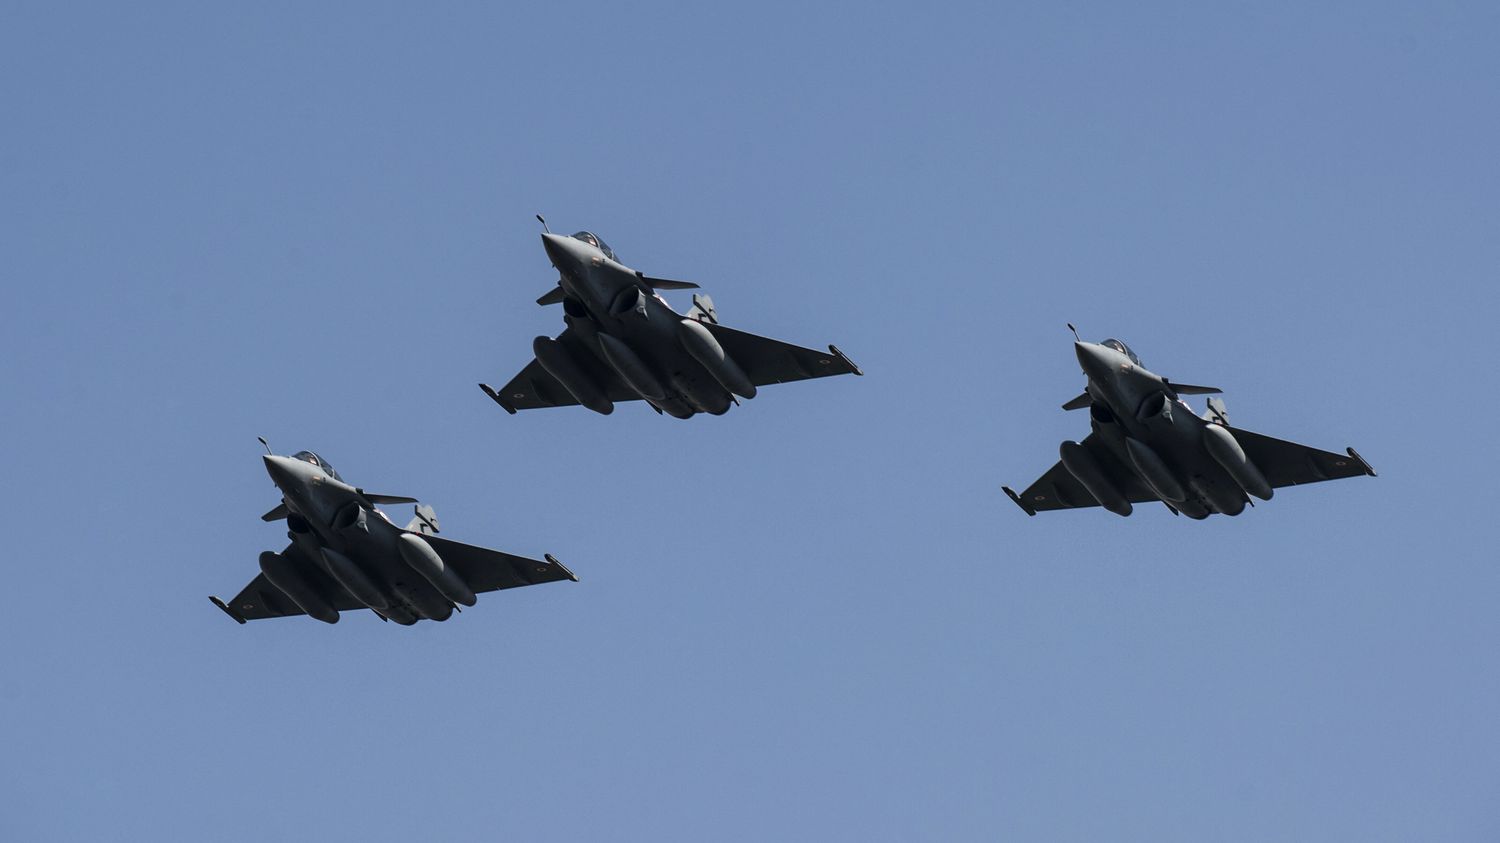 Egypt, the first customer of the French arms industry in 2021
